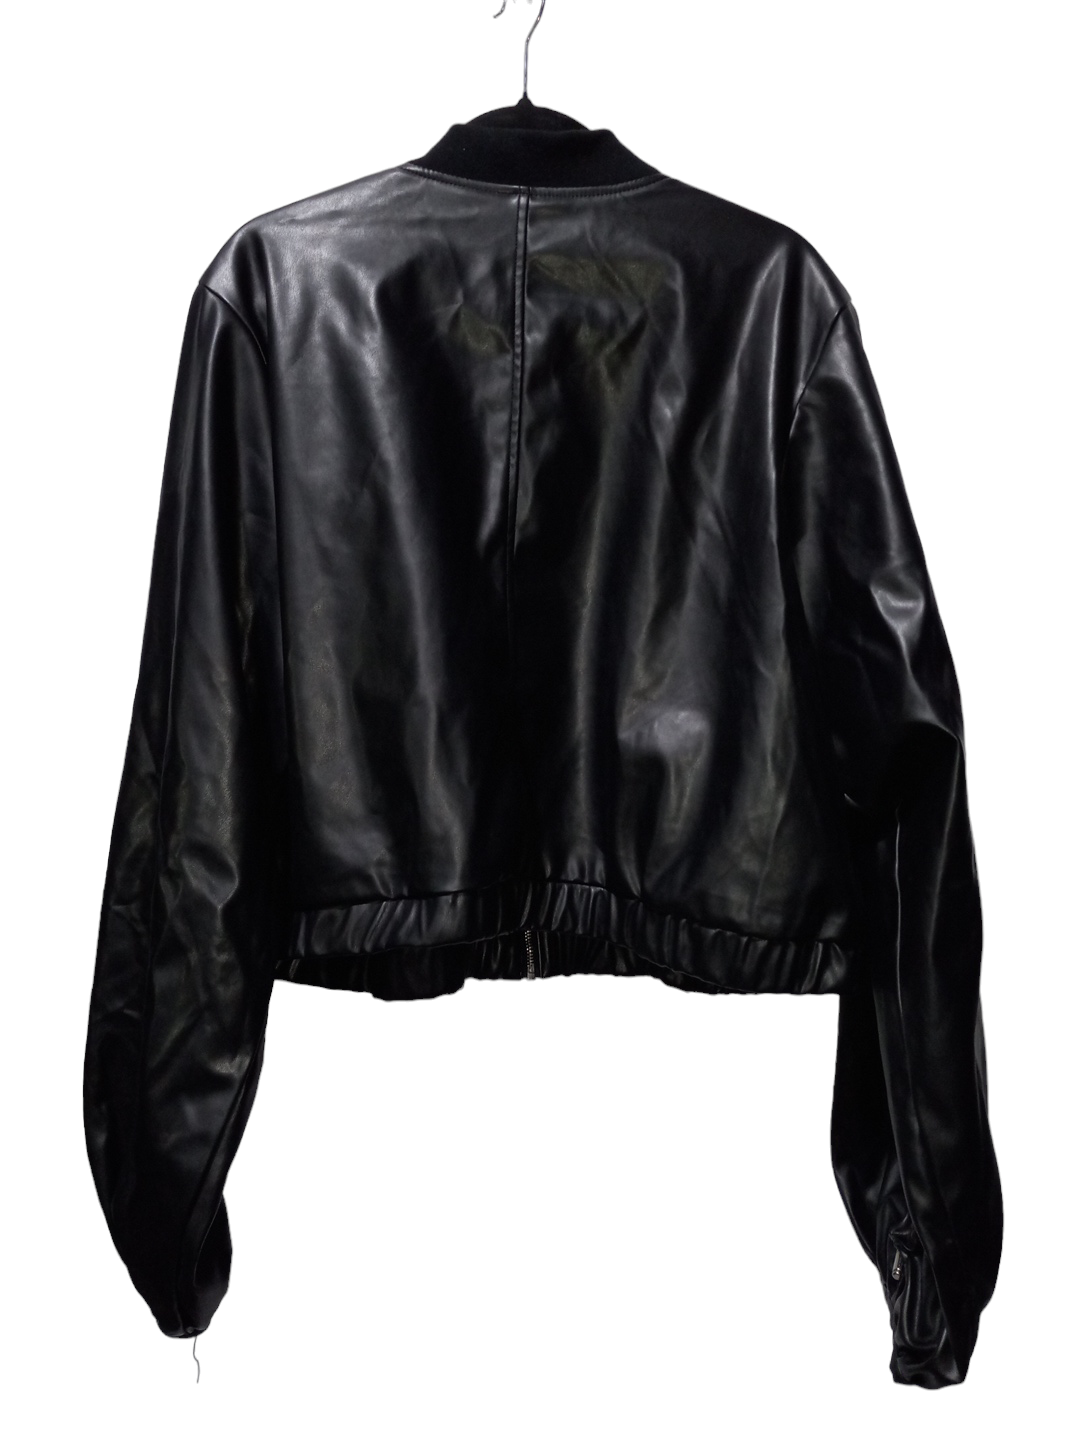 Black Jacket Leather Clothes Mentor, Size 3x